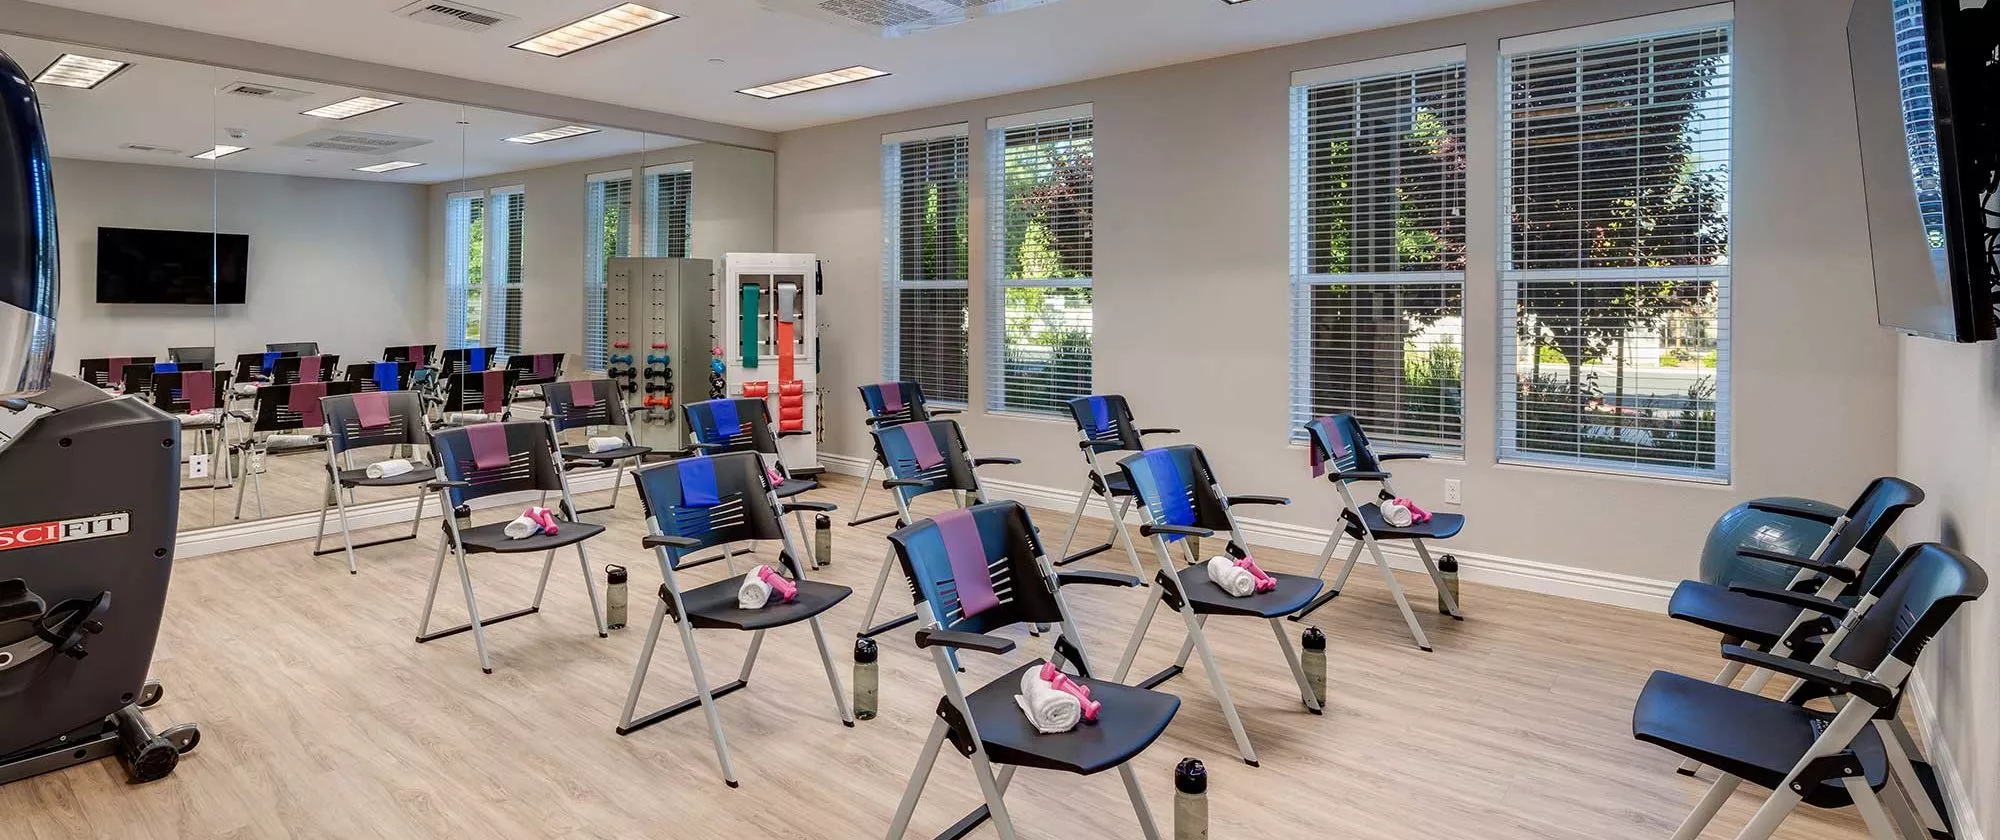 Silver Creek fitness room with activity chairs